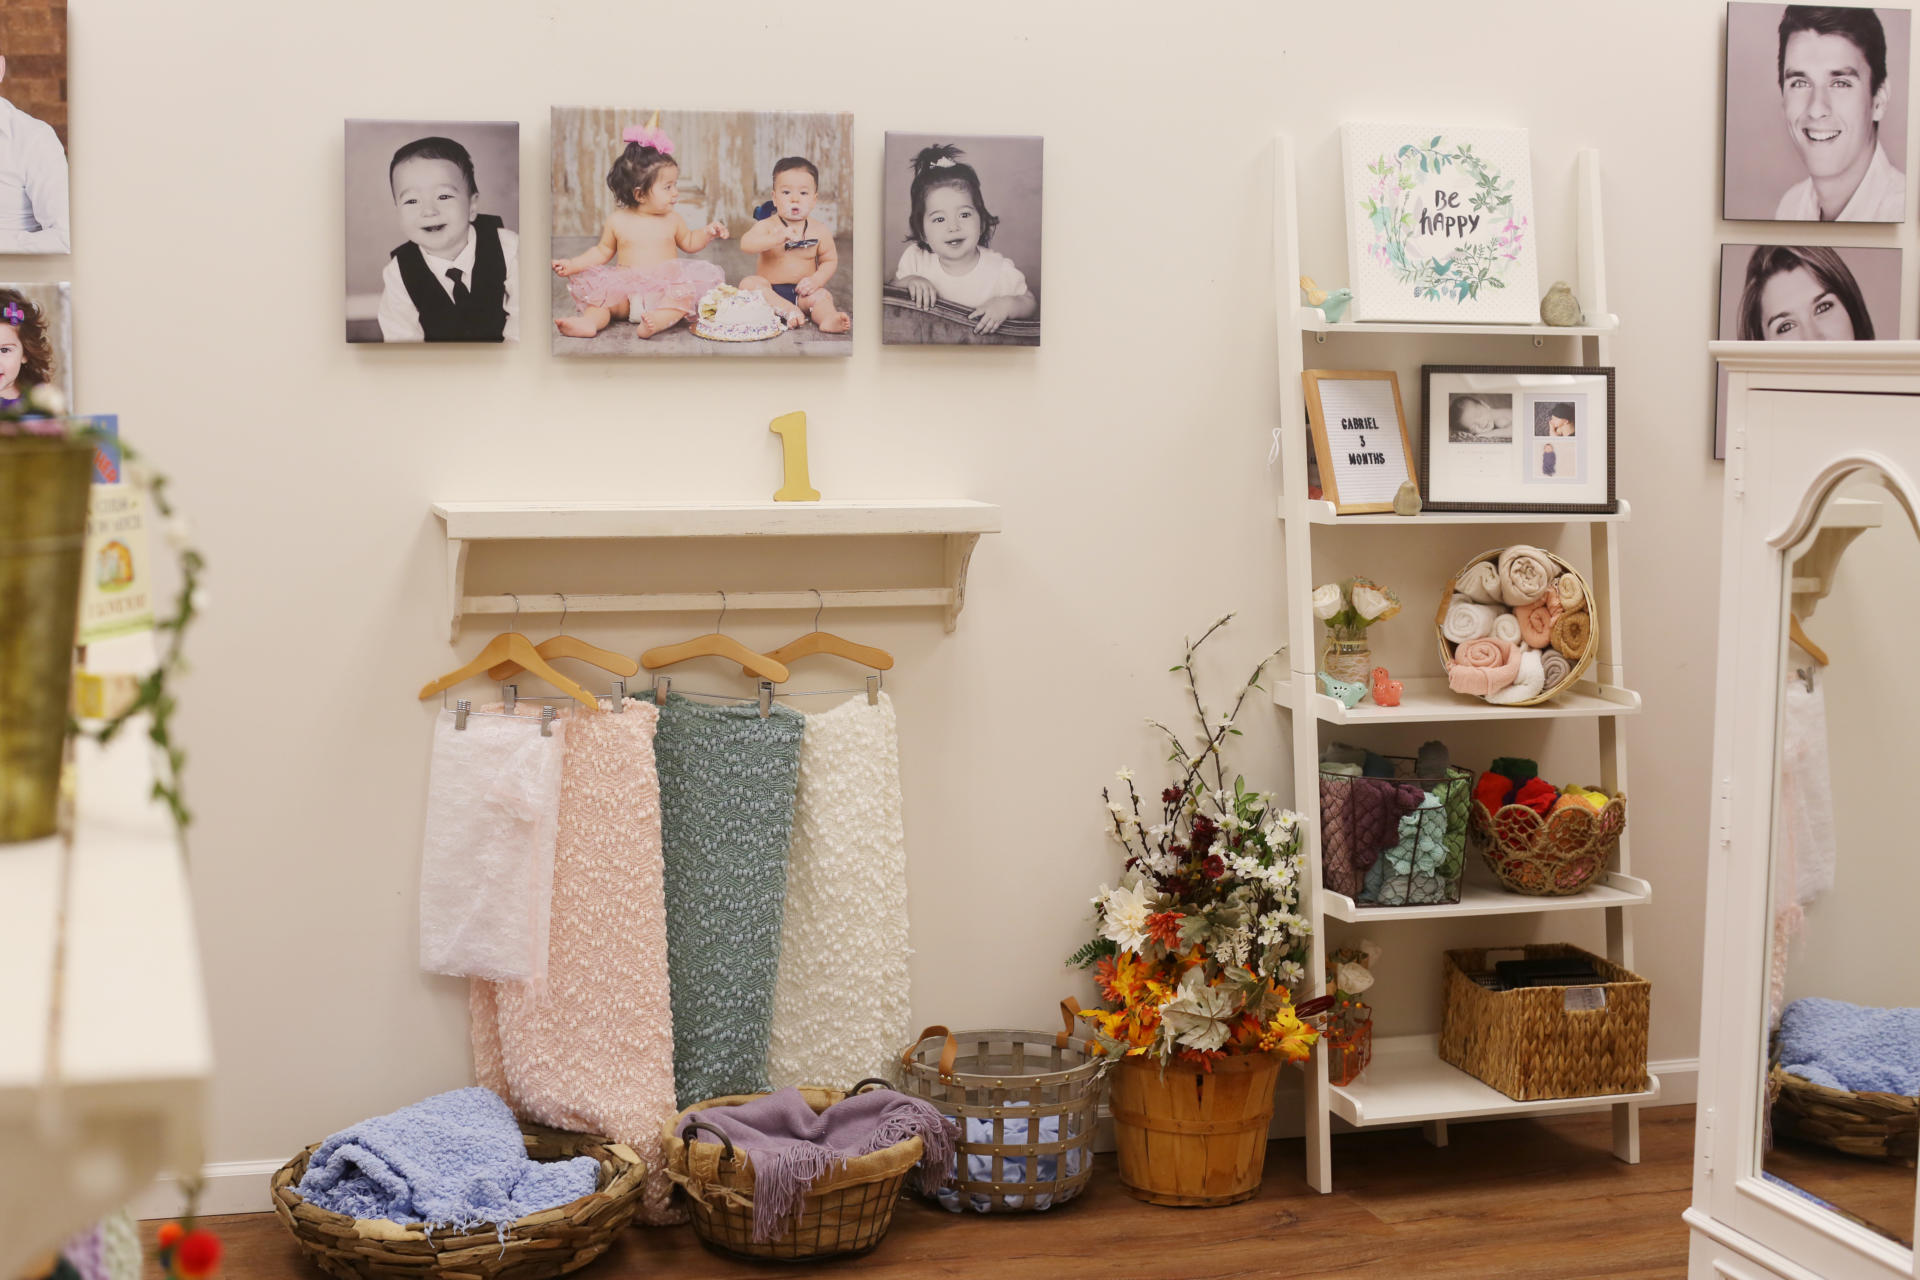 LOCAL: Newborn Photos at Little Nest Portraits by popular New Jersey lifestyle blogger What's For Dinner Esq.